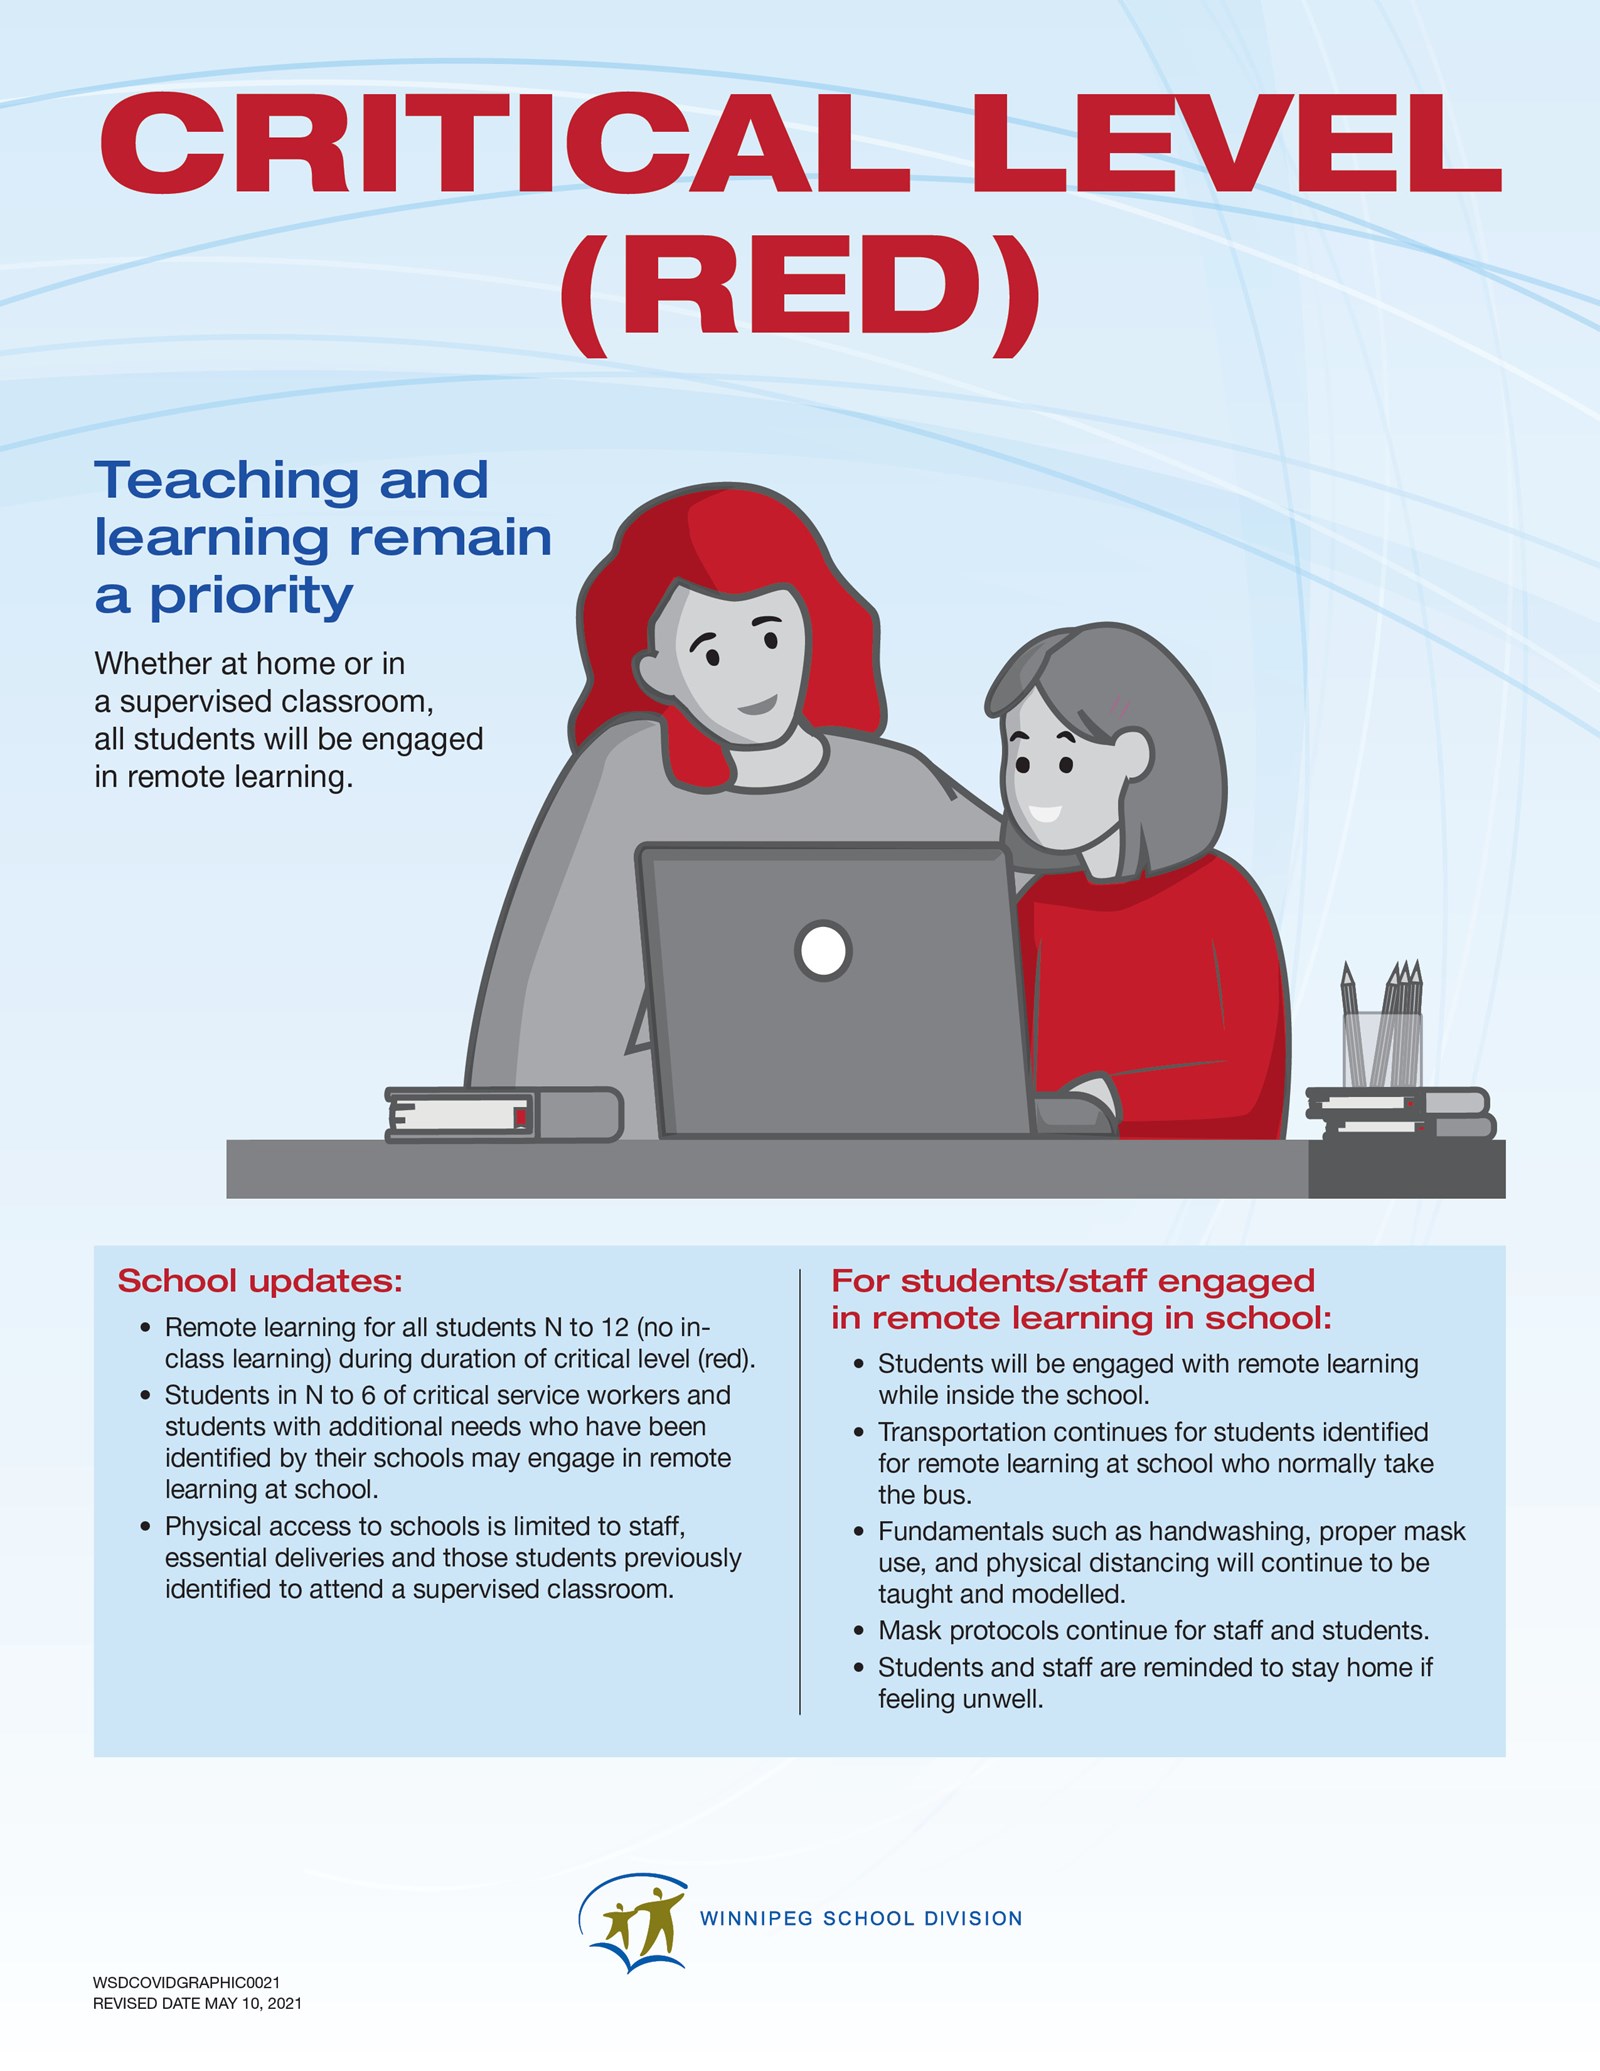 WSD Remote Learning Critical Level Red handout.jpg